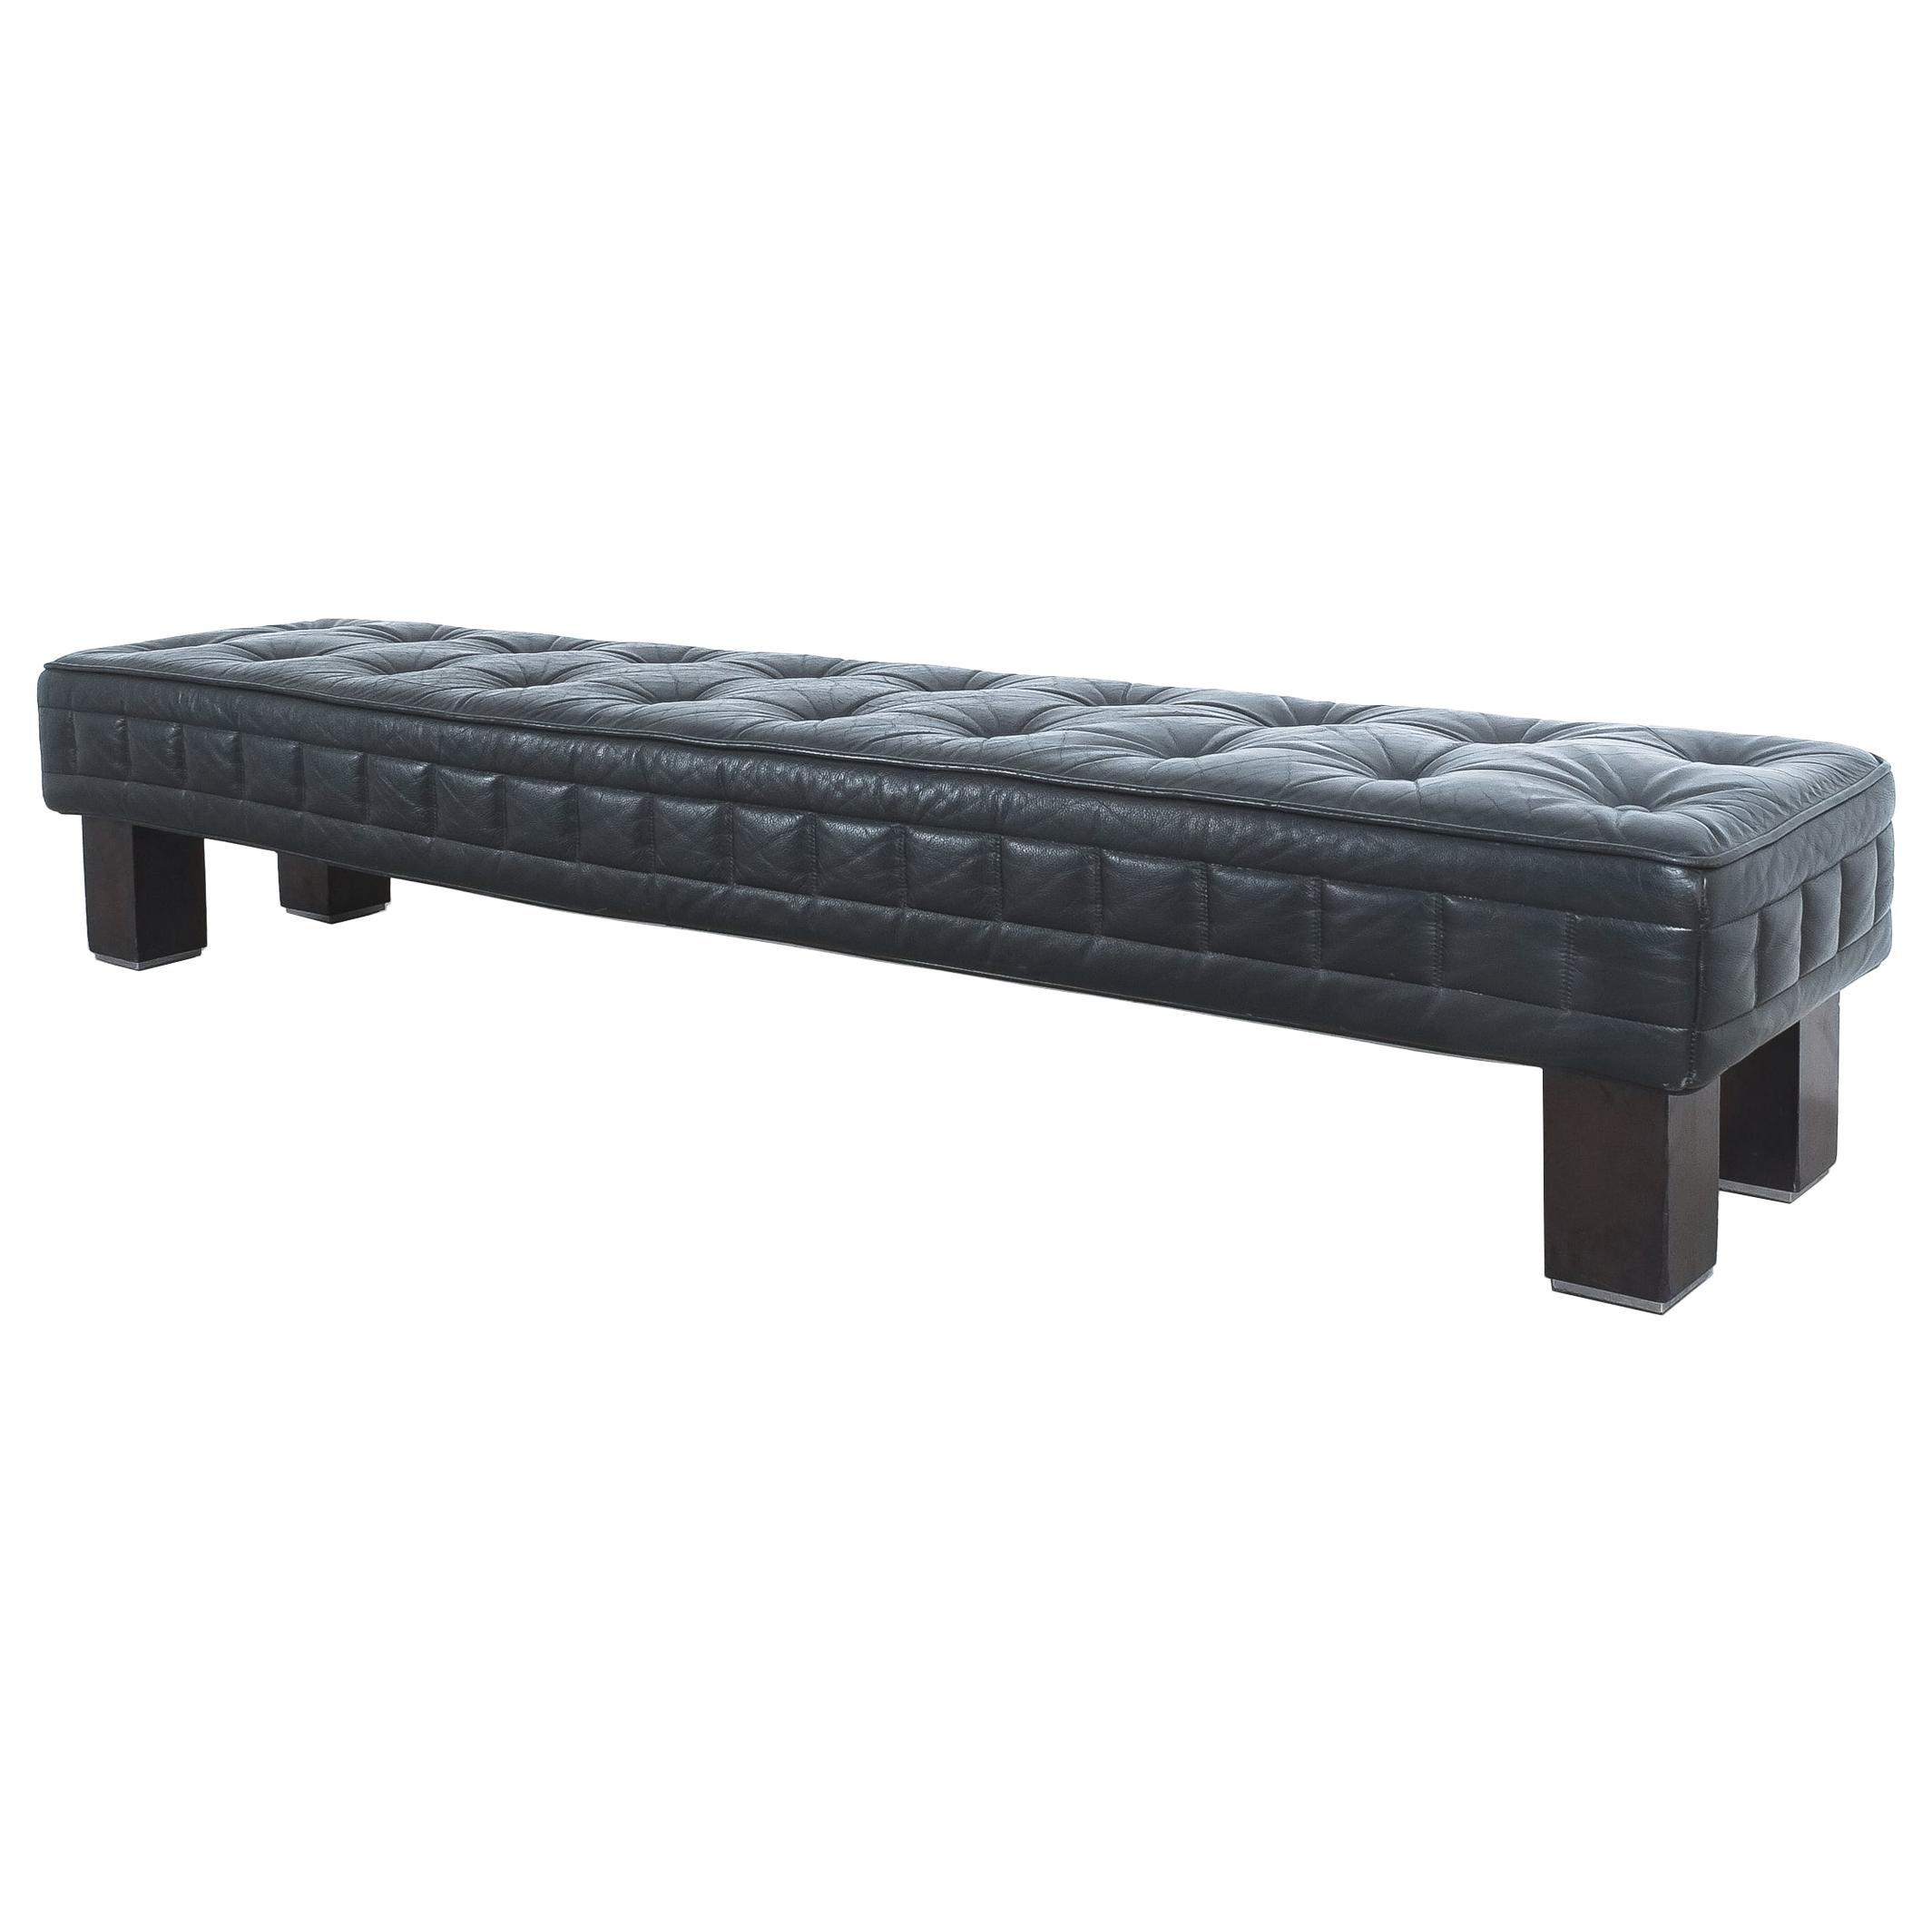 80” tufted black leather banquette or sofa-bench by Matteo Thun for Wittmann, Austria, designed and produced 1993 - custom made.
Dimensions are: 79.52